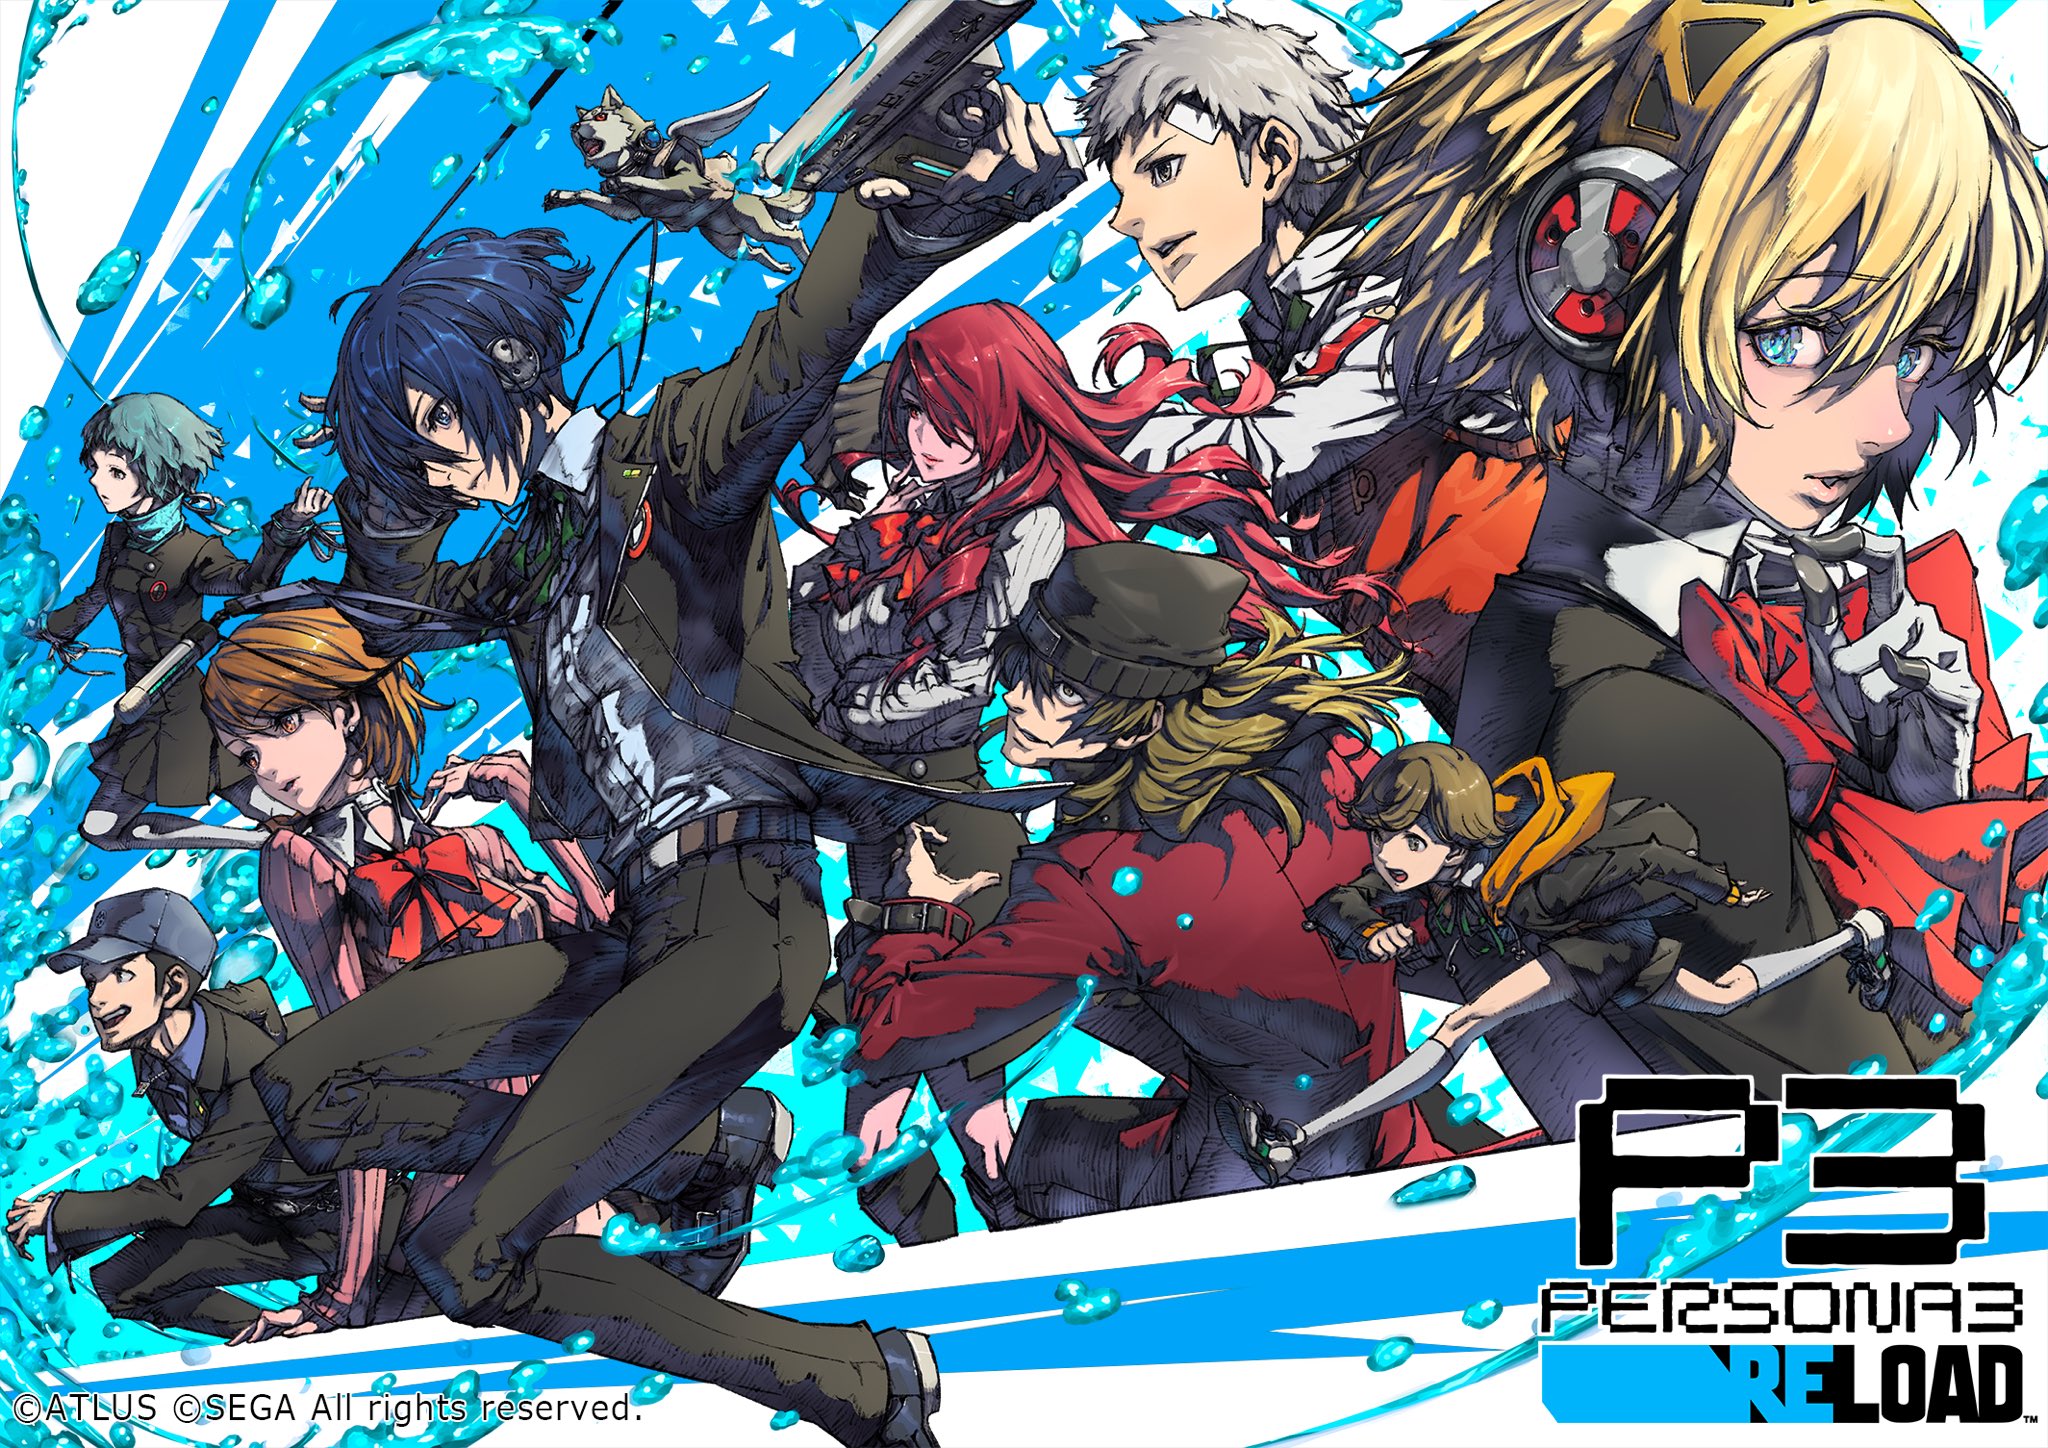 Xenoblade Chronicles X Character Designer Shares New Persona 3 Reload Artwork